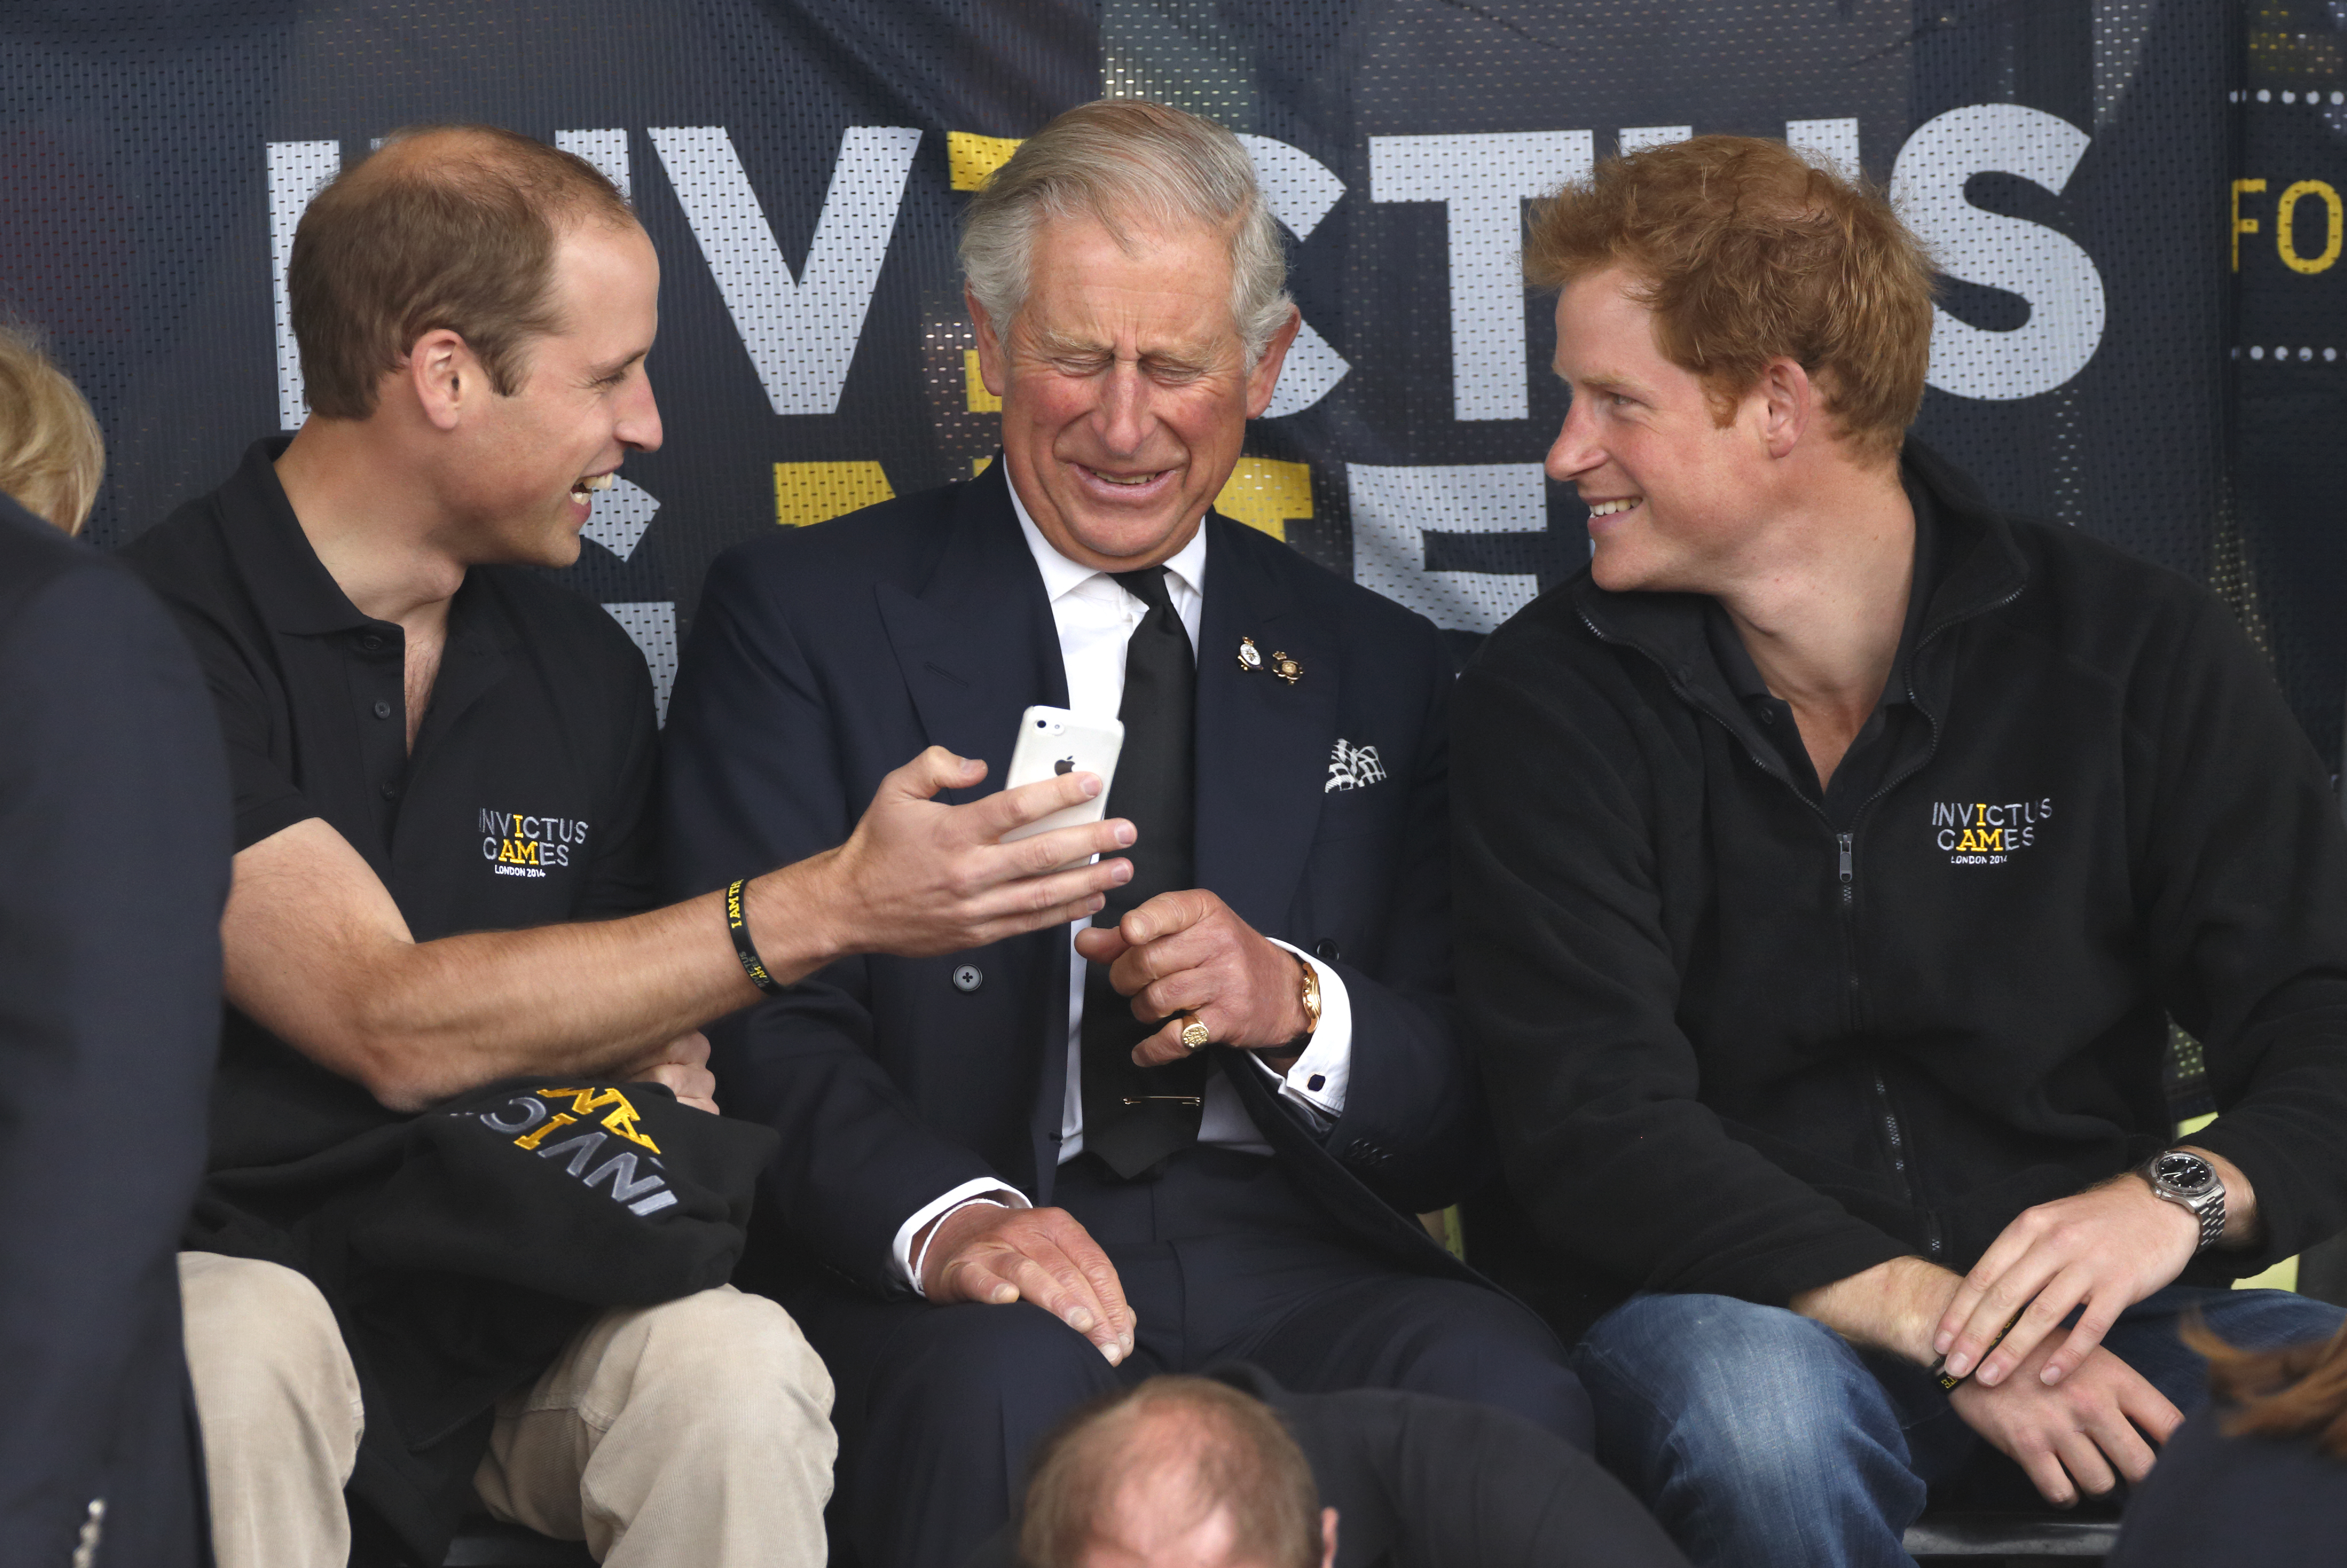 Prince William, Prince Charles and Prince Harry attend the Invictus Games on September 11, 2014 in London, England | Source: Getty Images